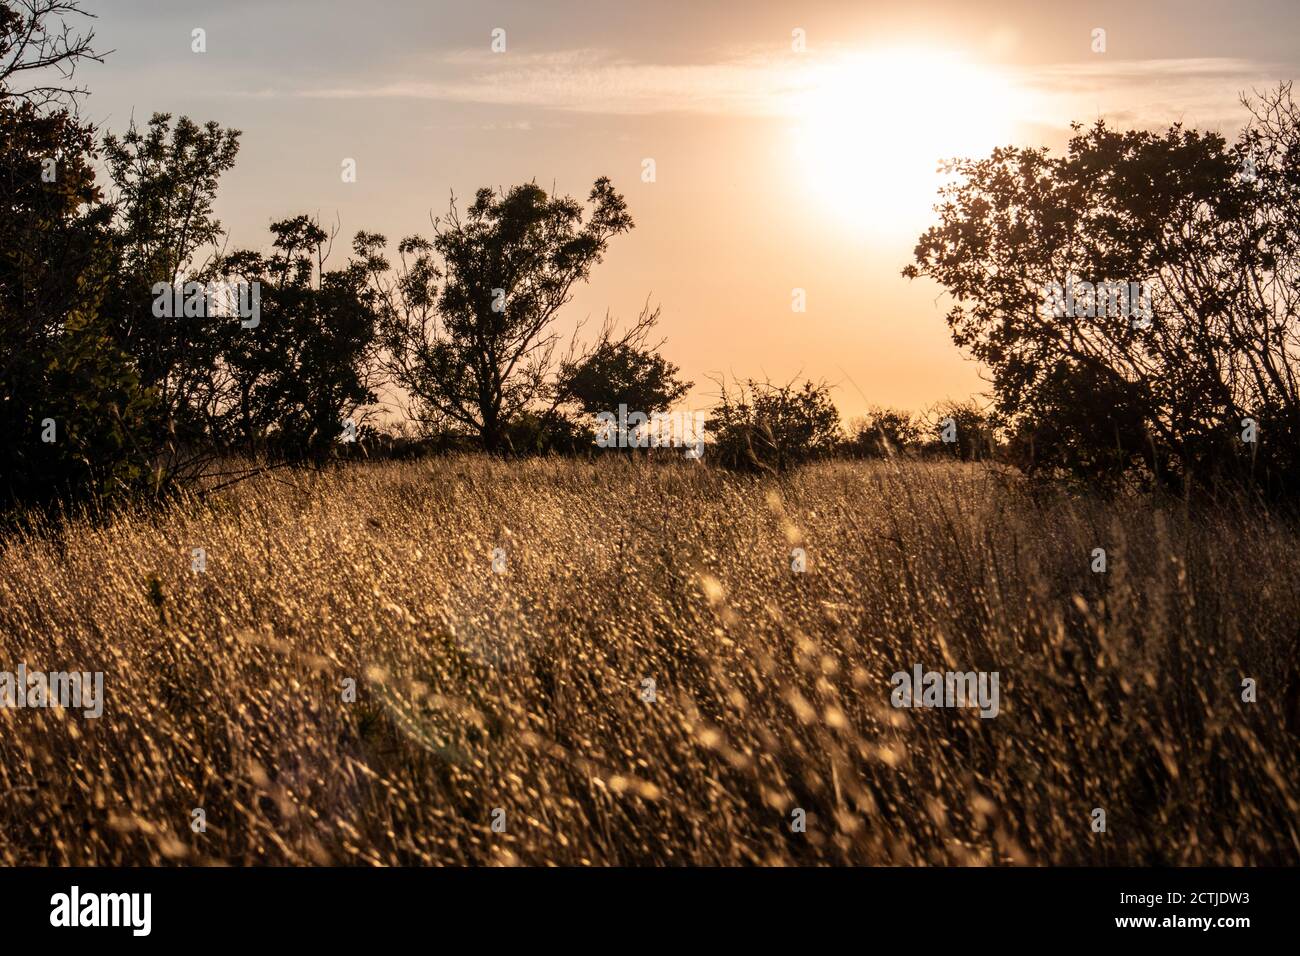 Sunset in rural area over the wild lawn with dry grass shining in sun rays and dark trees silhouettes in warm autumn vivid colors Stock Photo